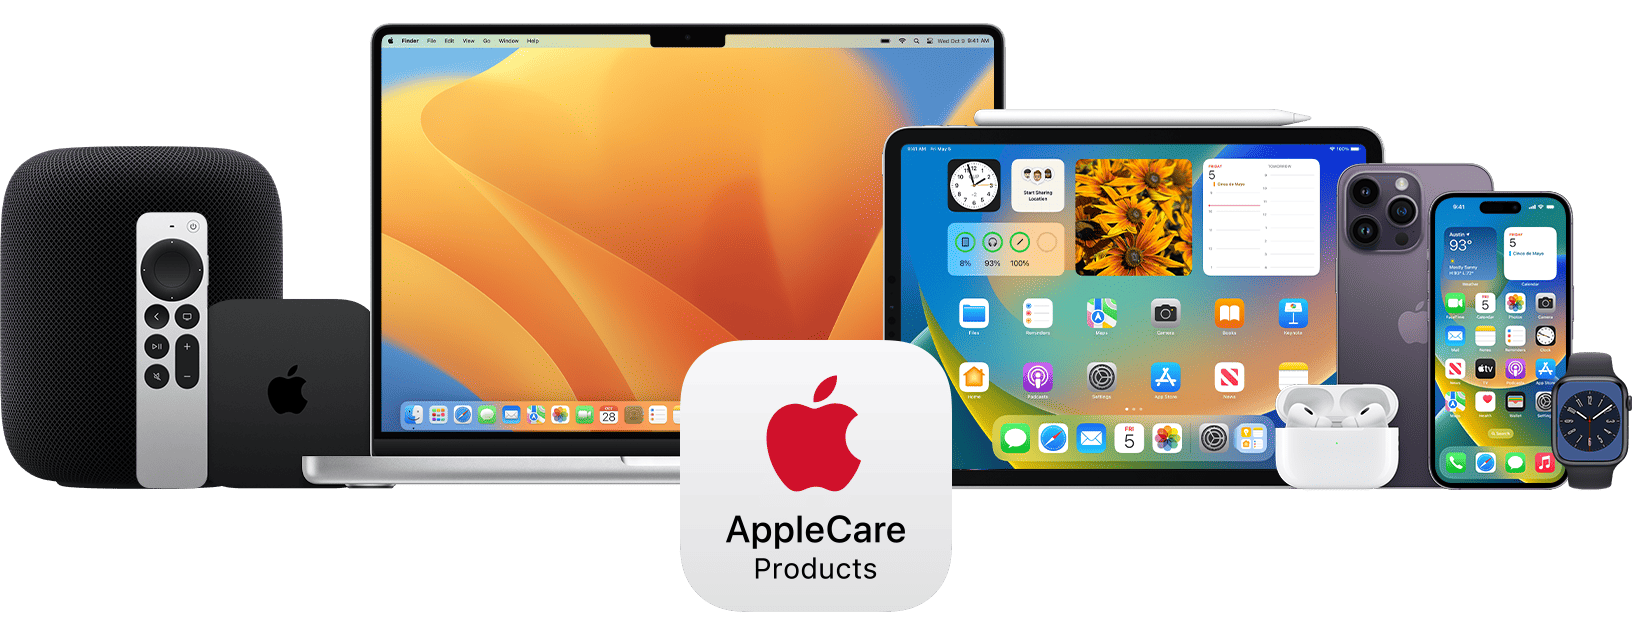 Applecare Plus Products